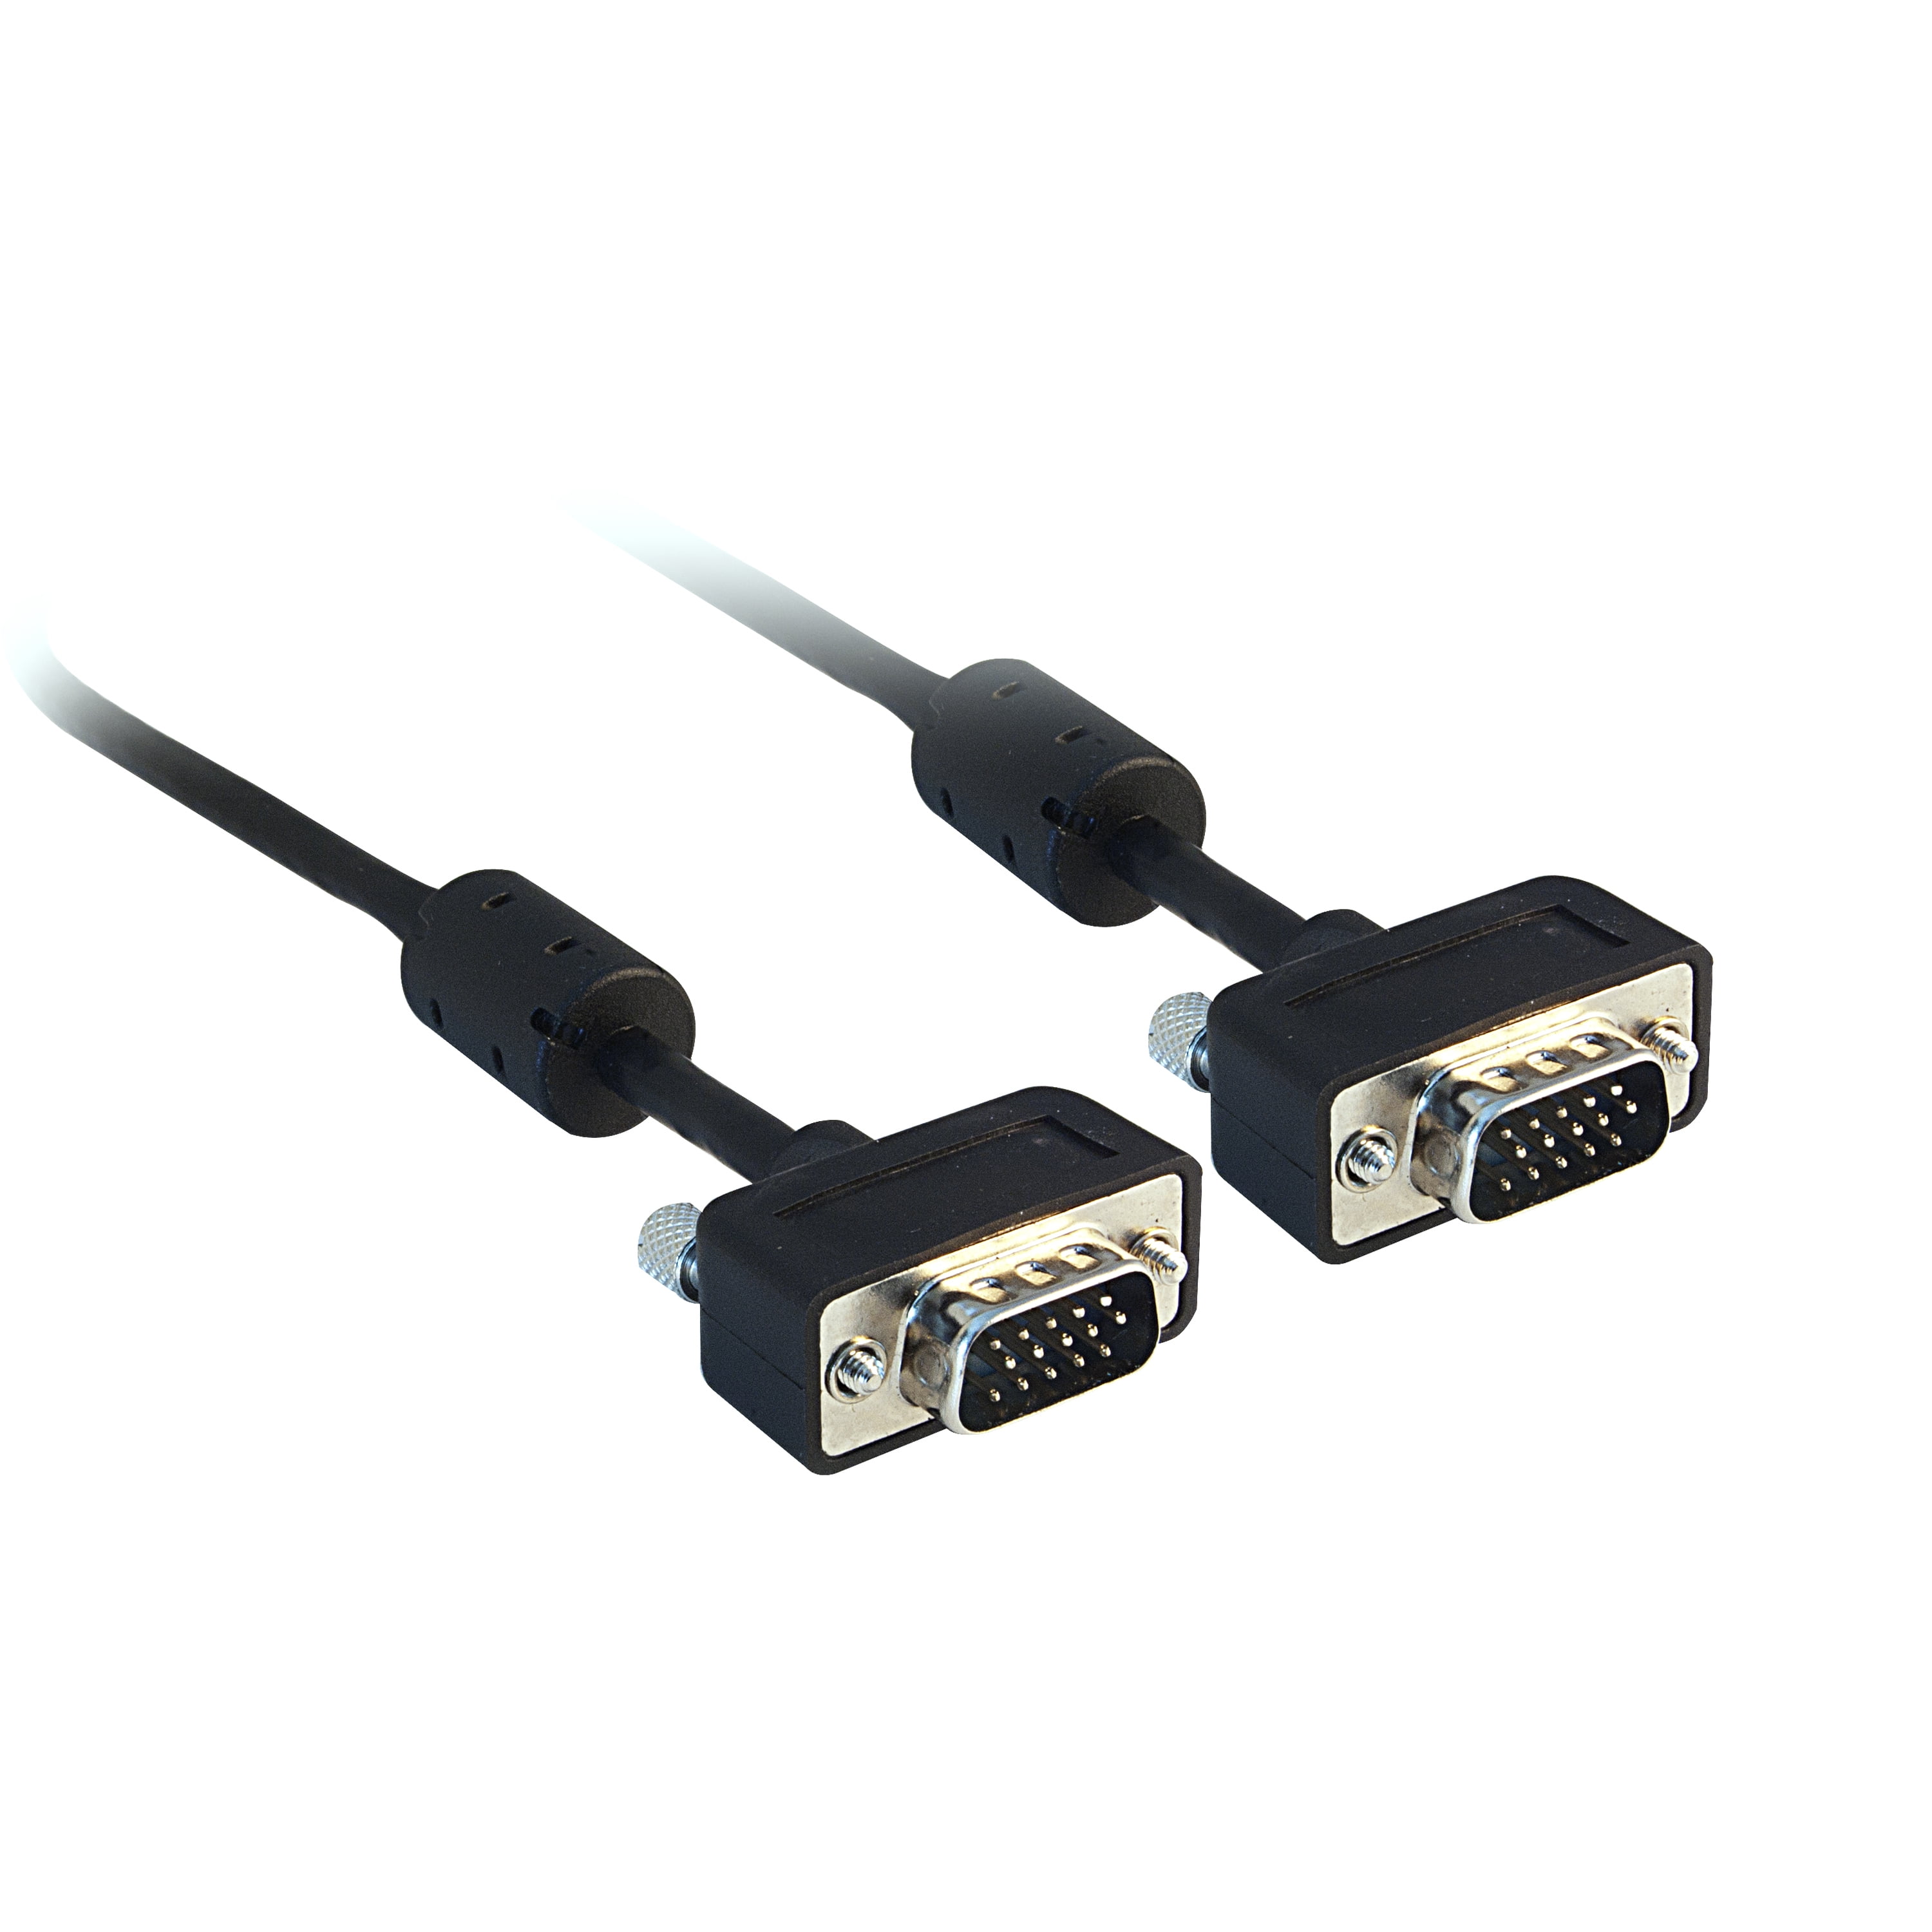 6-Foot OF-10D1-03406BK 1:1 Black 9 Conductor Offex DB9 Female Serial Cable UL Rated 